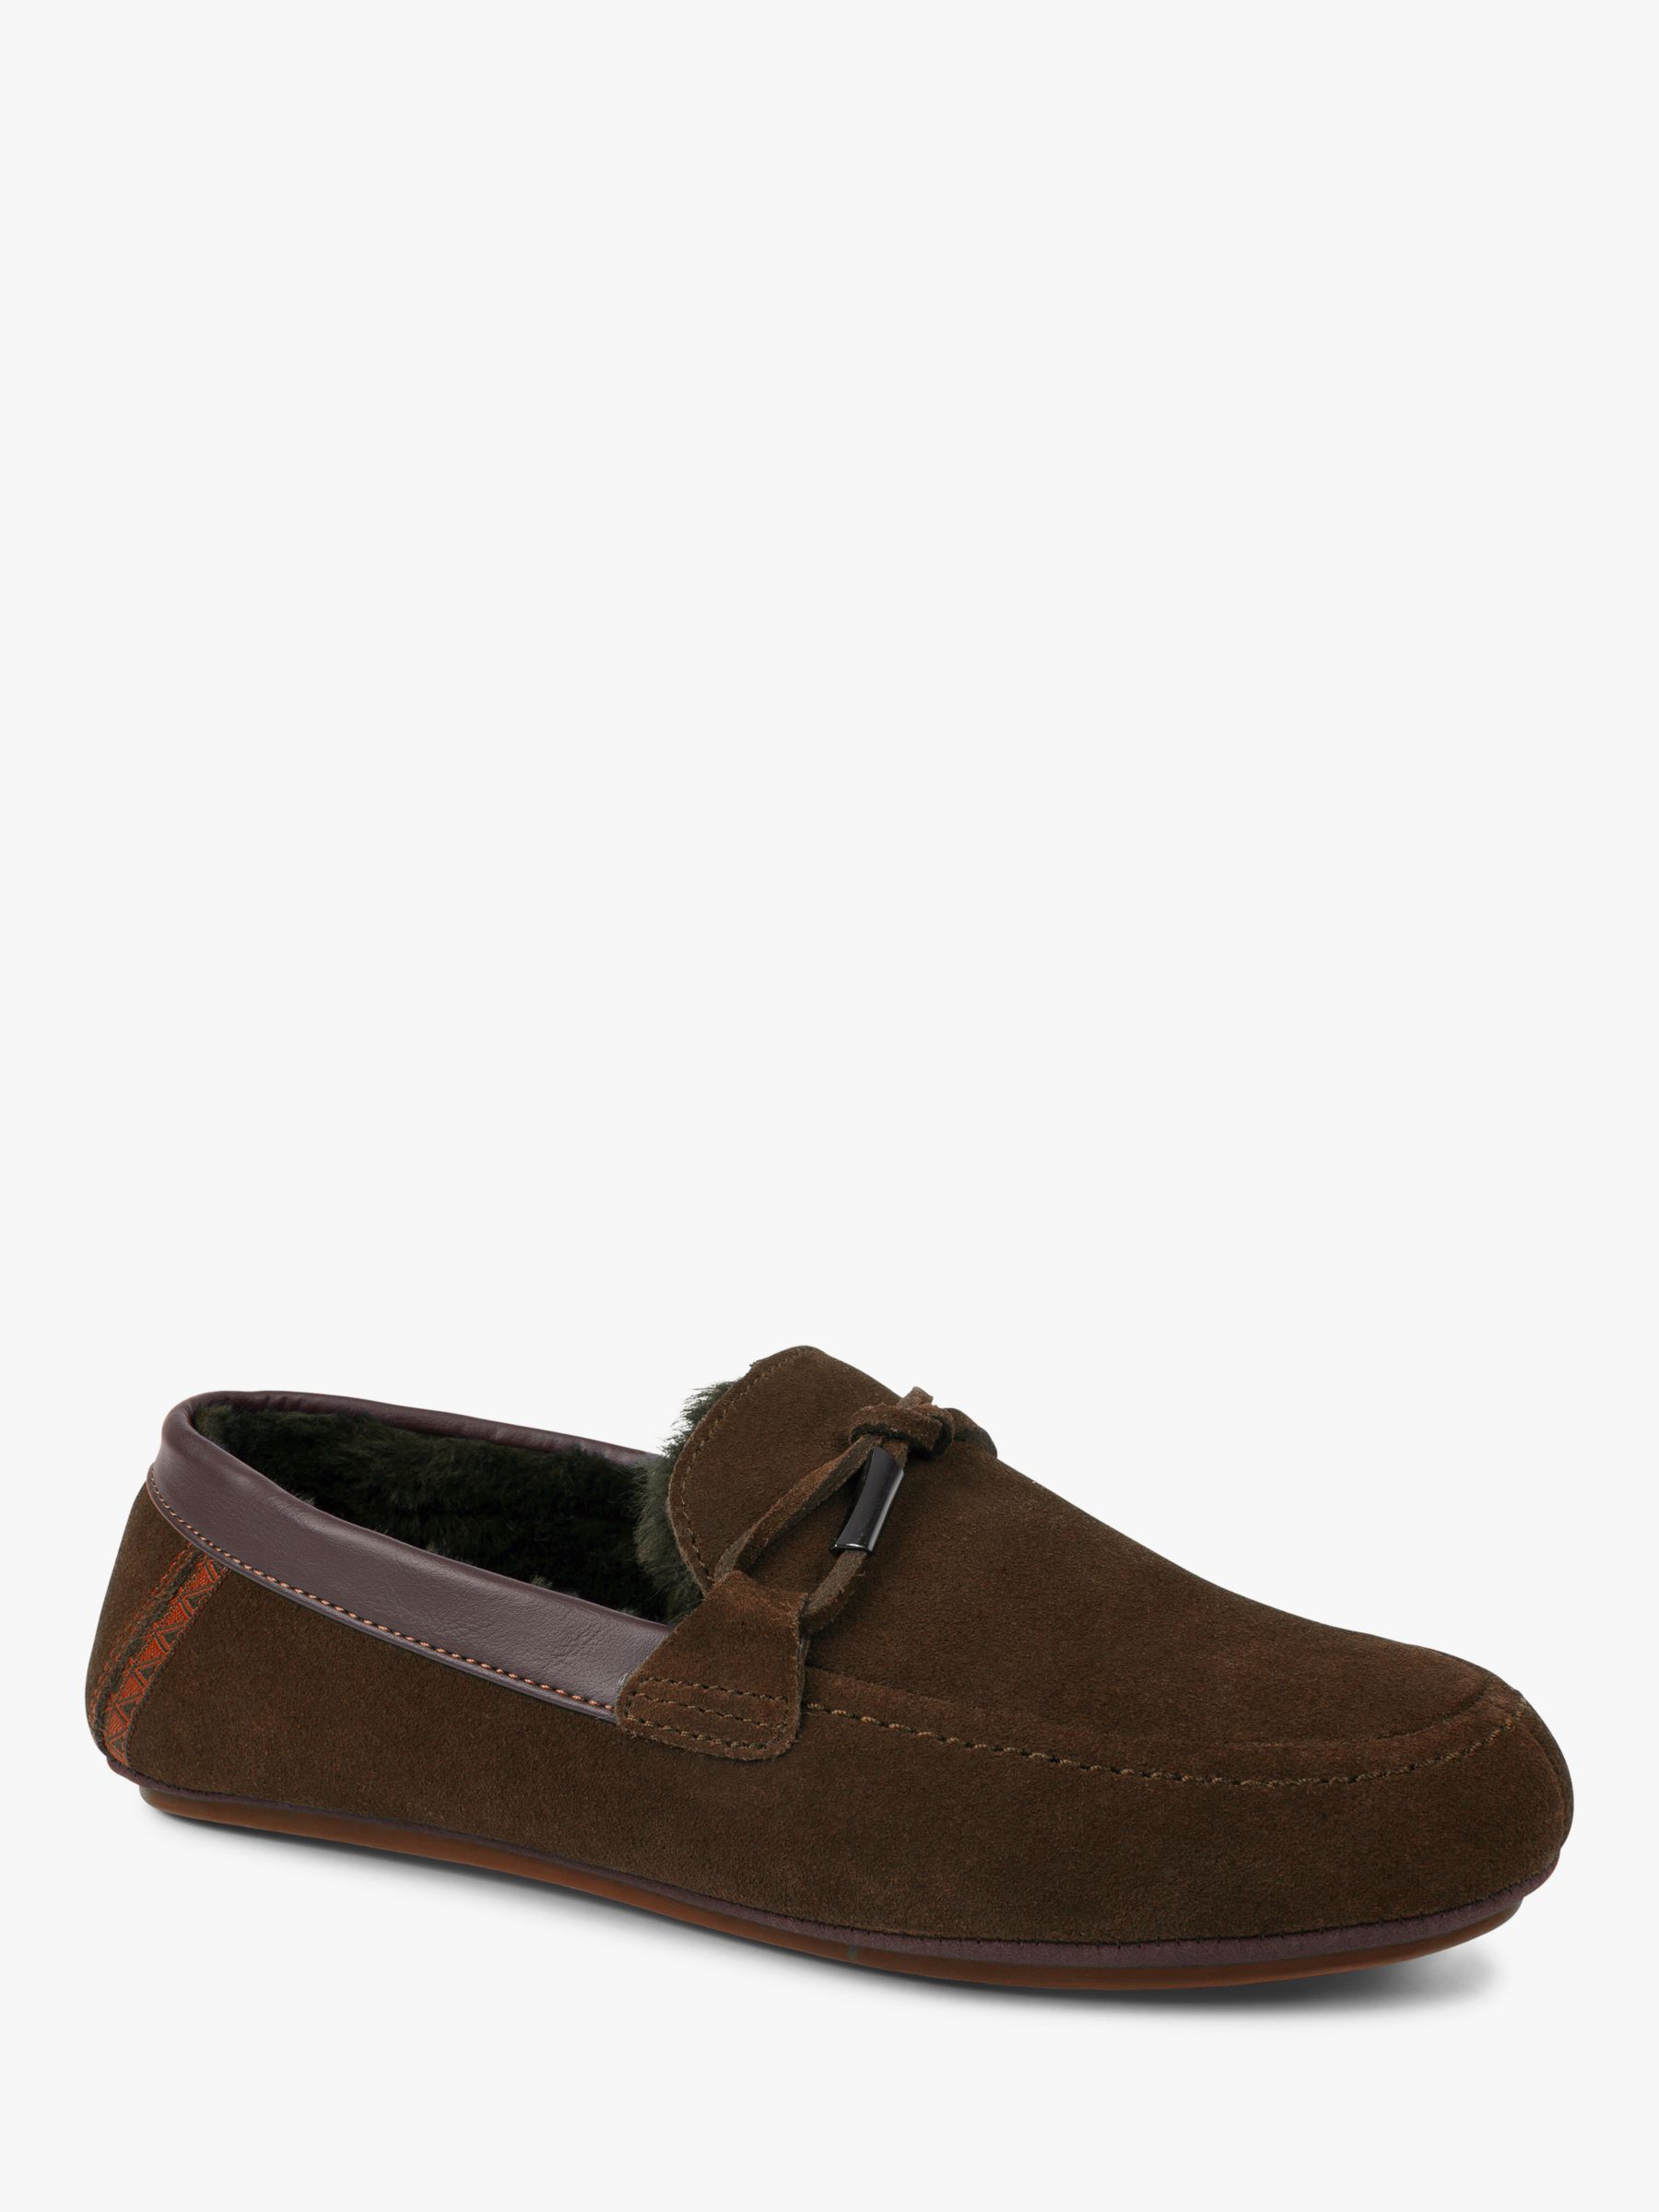 ted baker moccasin slippers